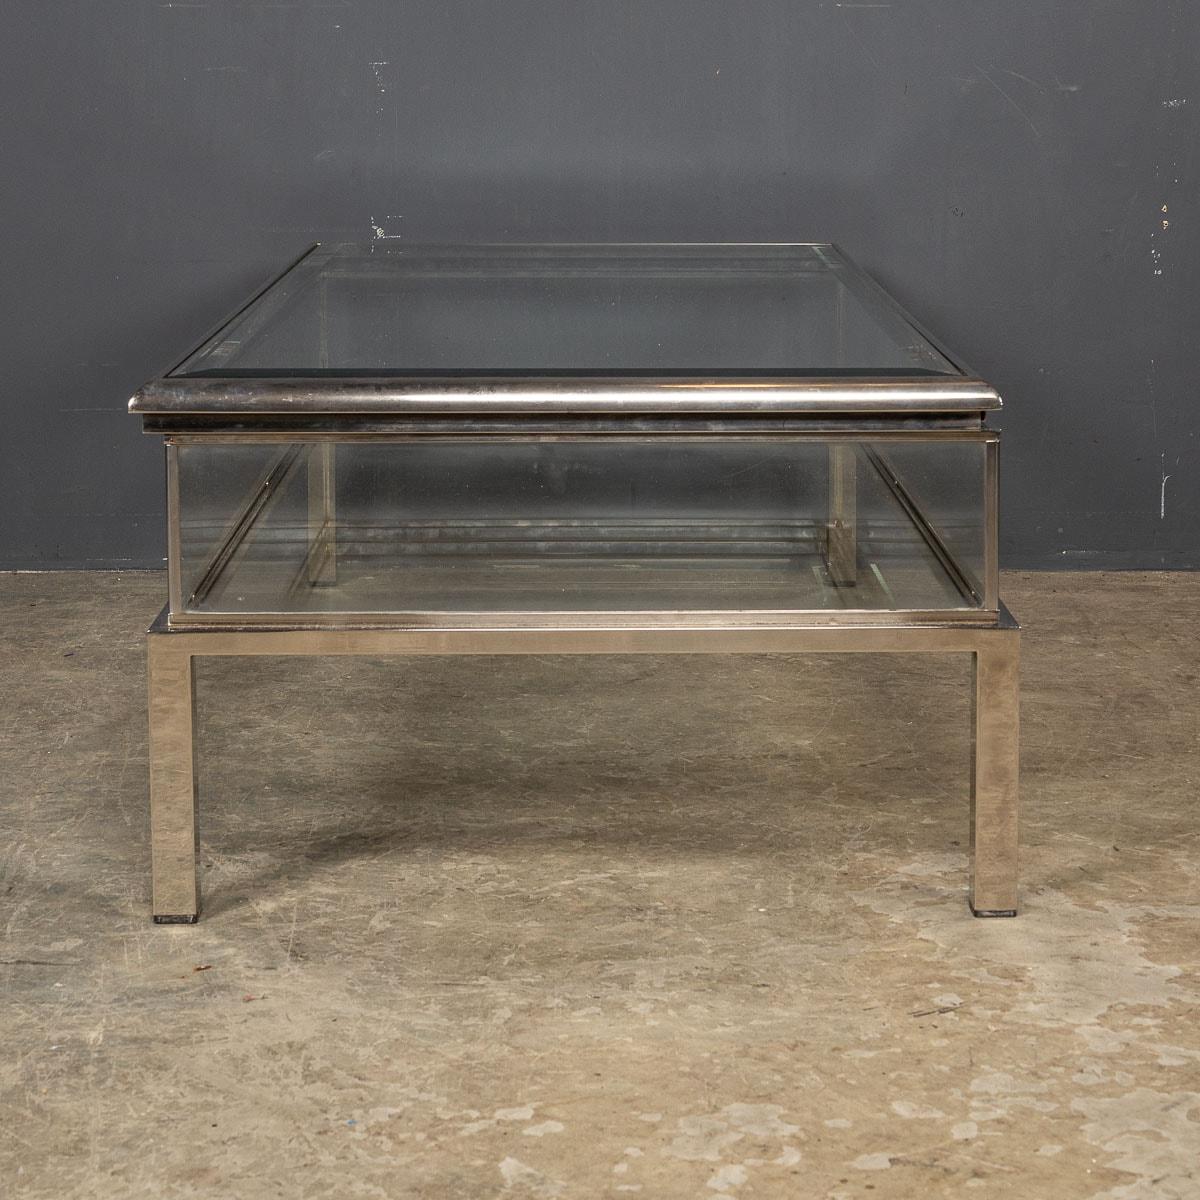 20th Century White Metal & Glass Vitrine Coffee Table, c.1970 For Sale 3